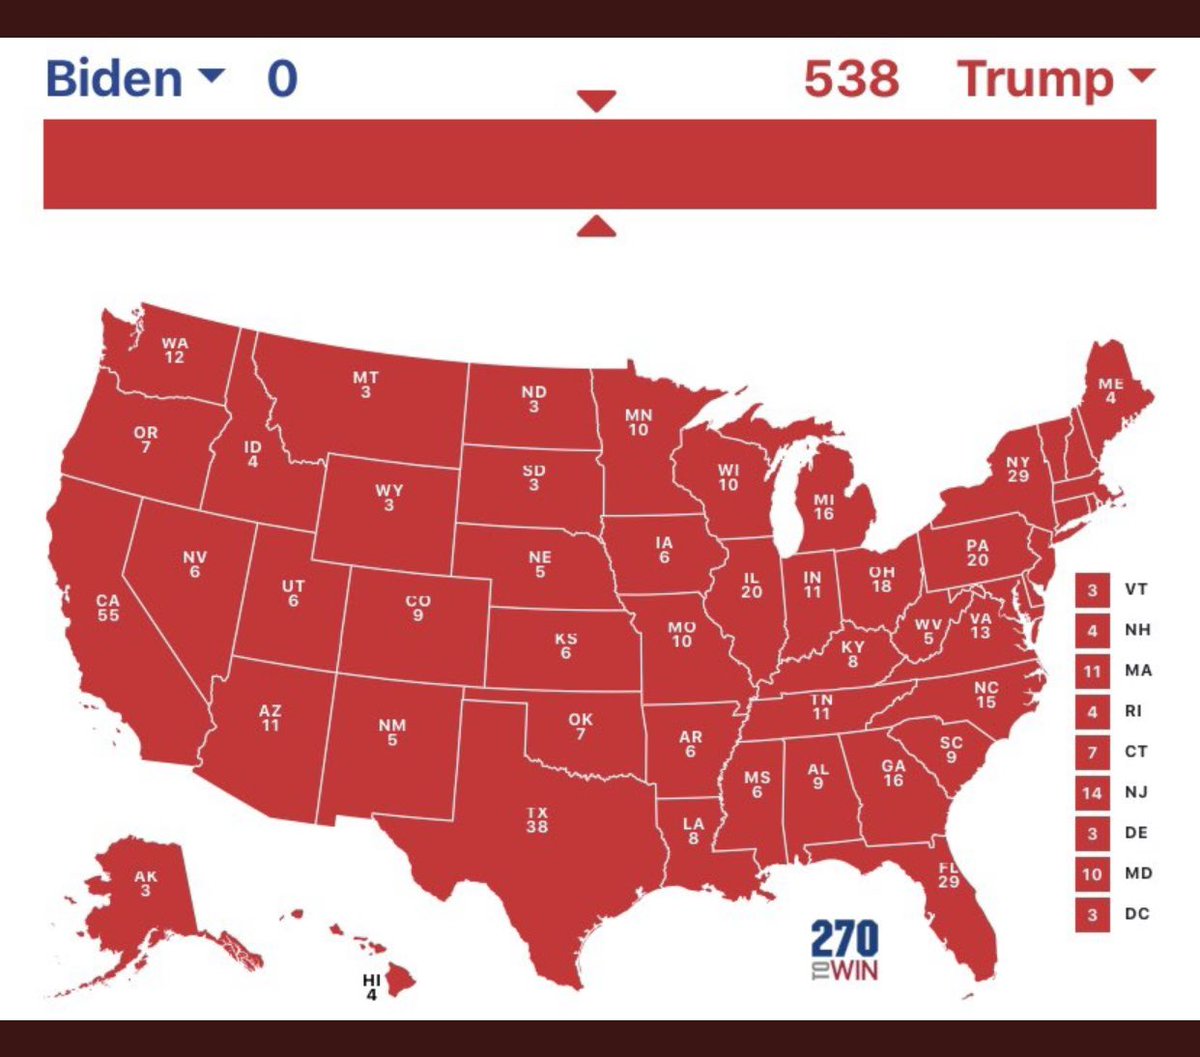 Trump is gonna take ALL BLUE STATES IN 2024
#Trump2024